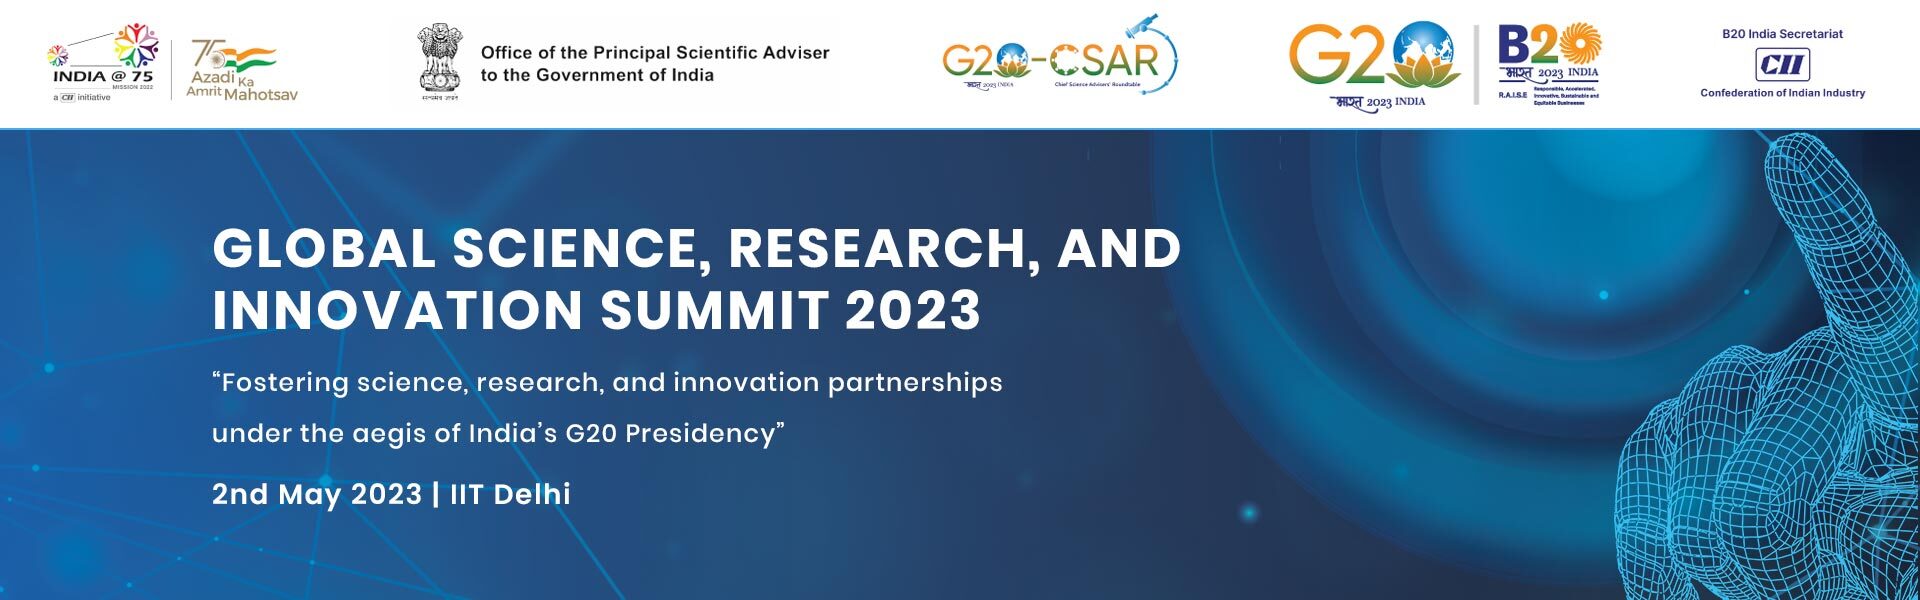 CII Global Science, Innovation, & Research Summit 2023